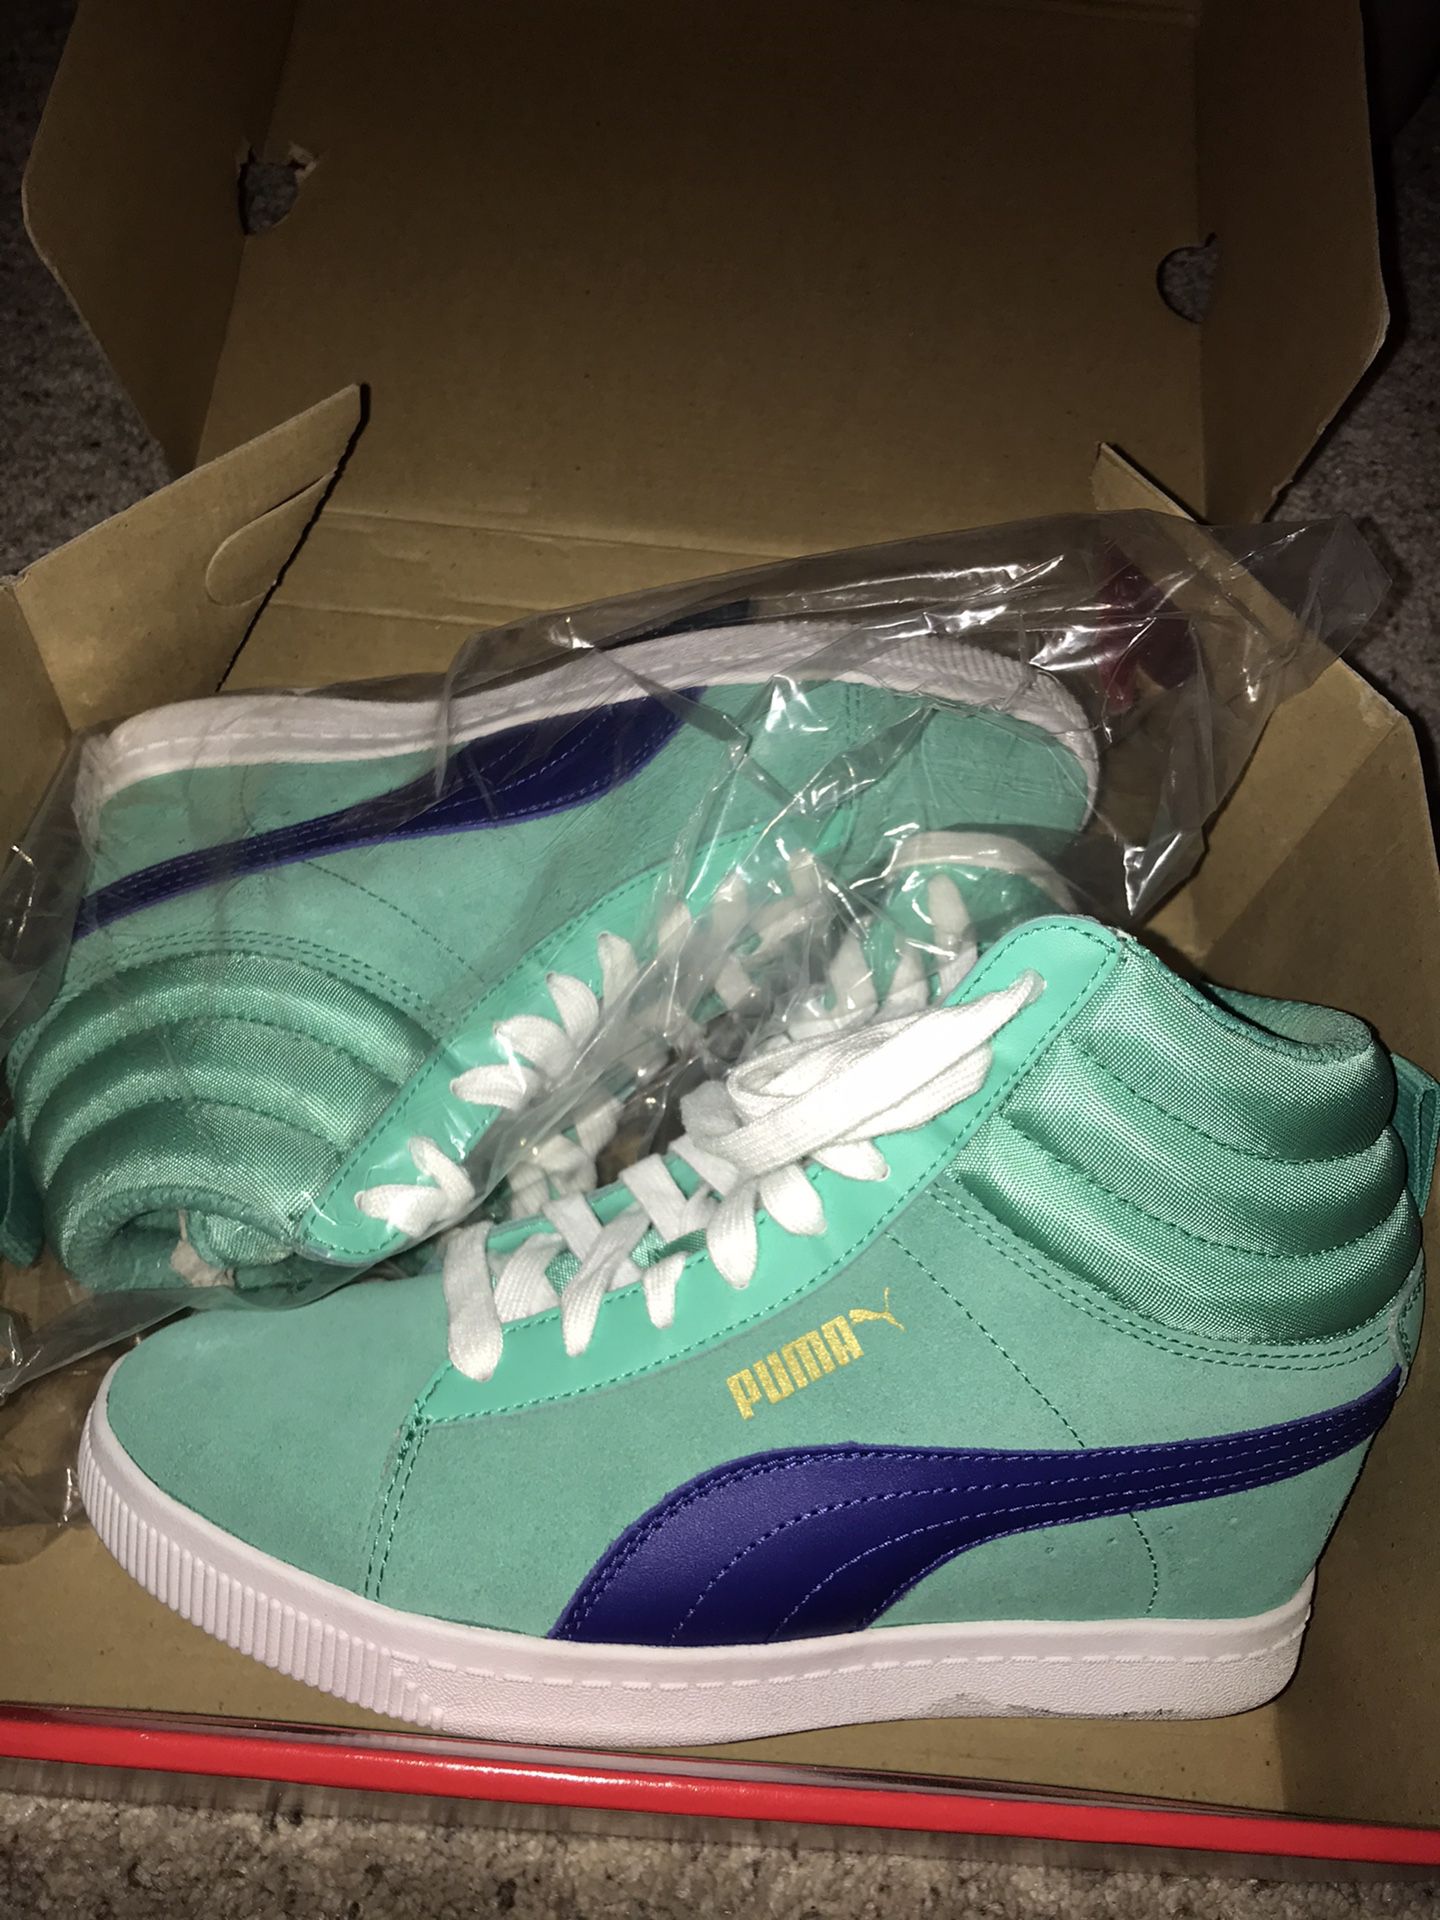 Brand New Limited Edition PUMA Woman’s Electric Green Suede Wedge Sneakers